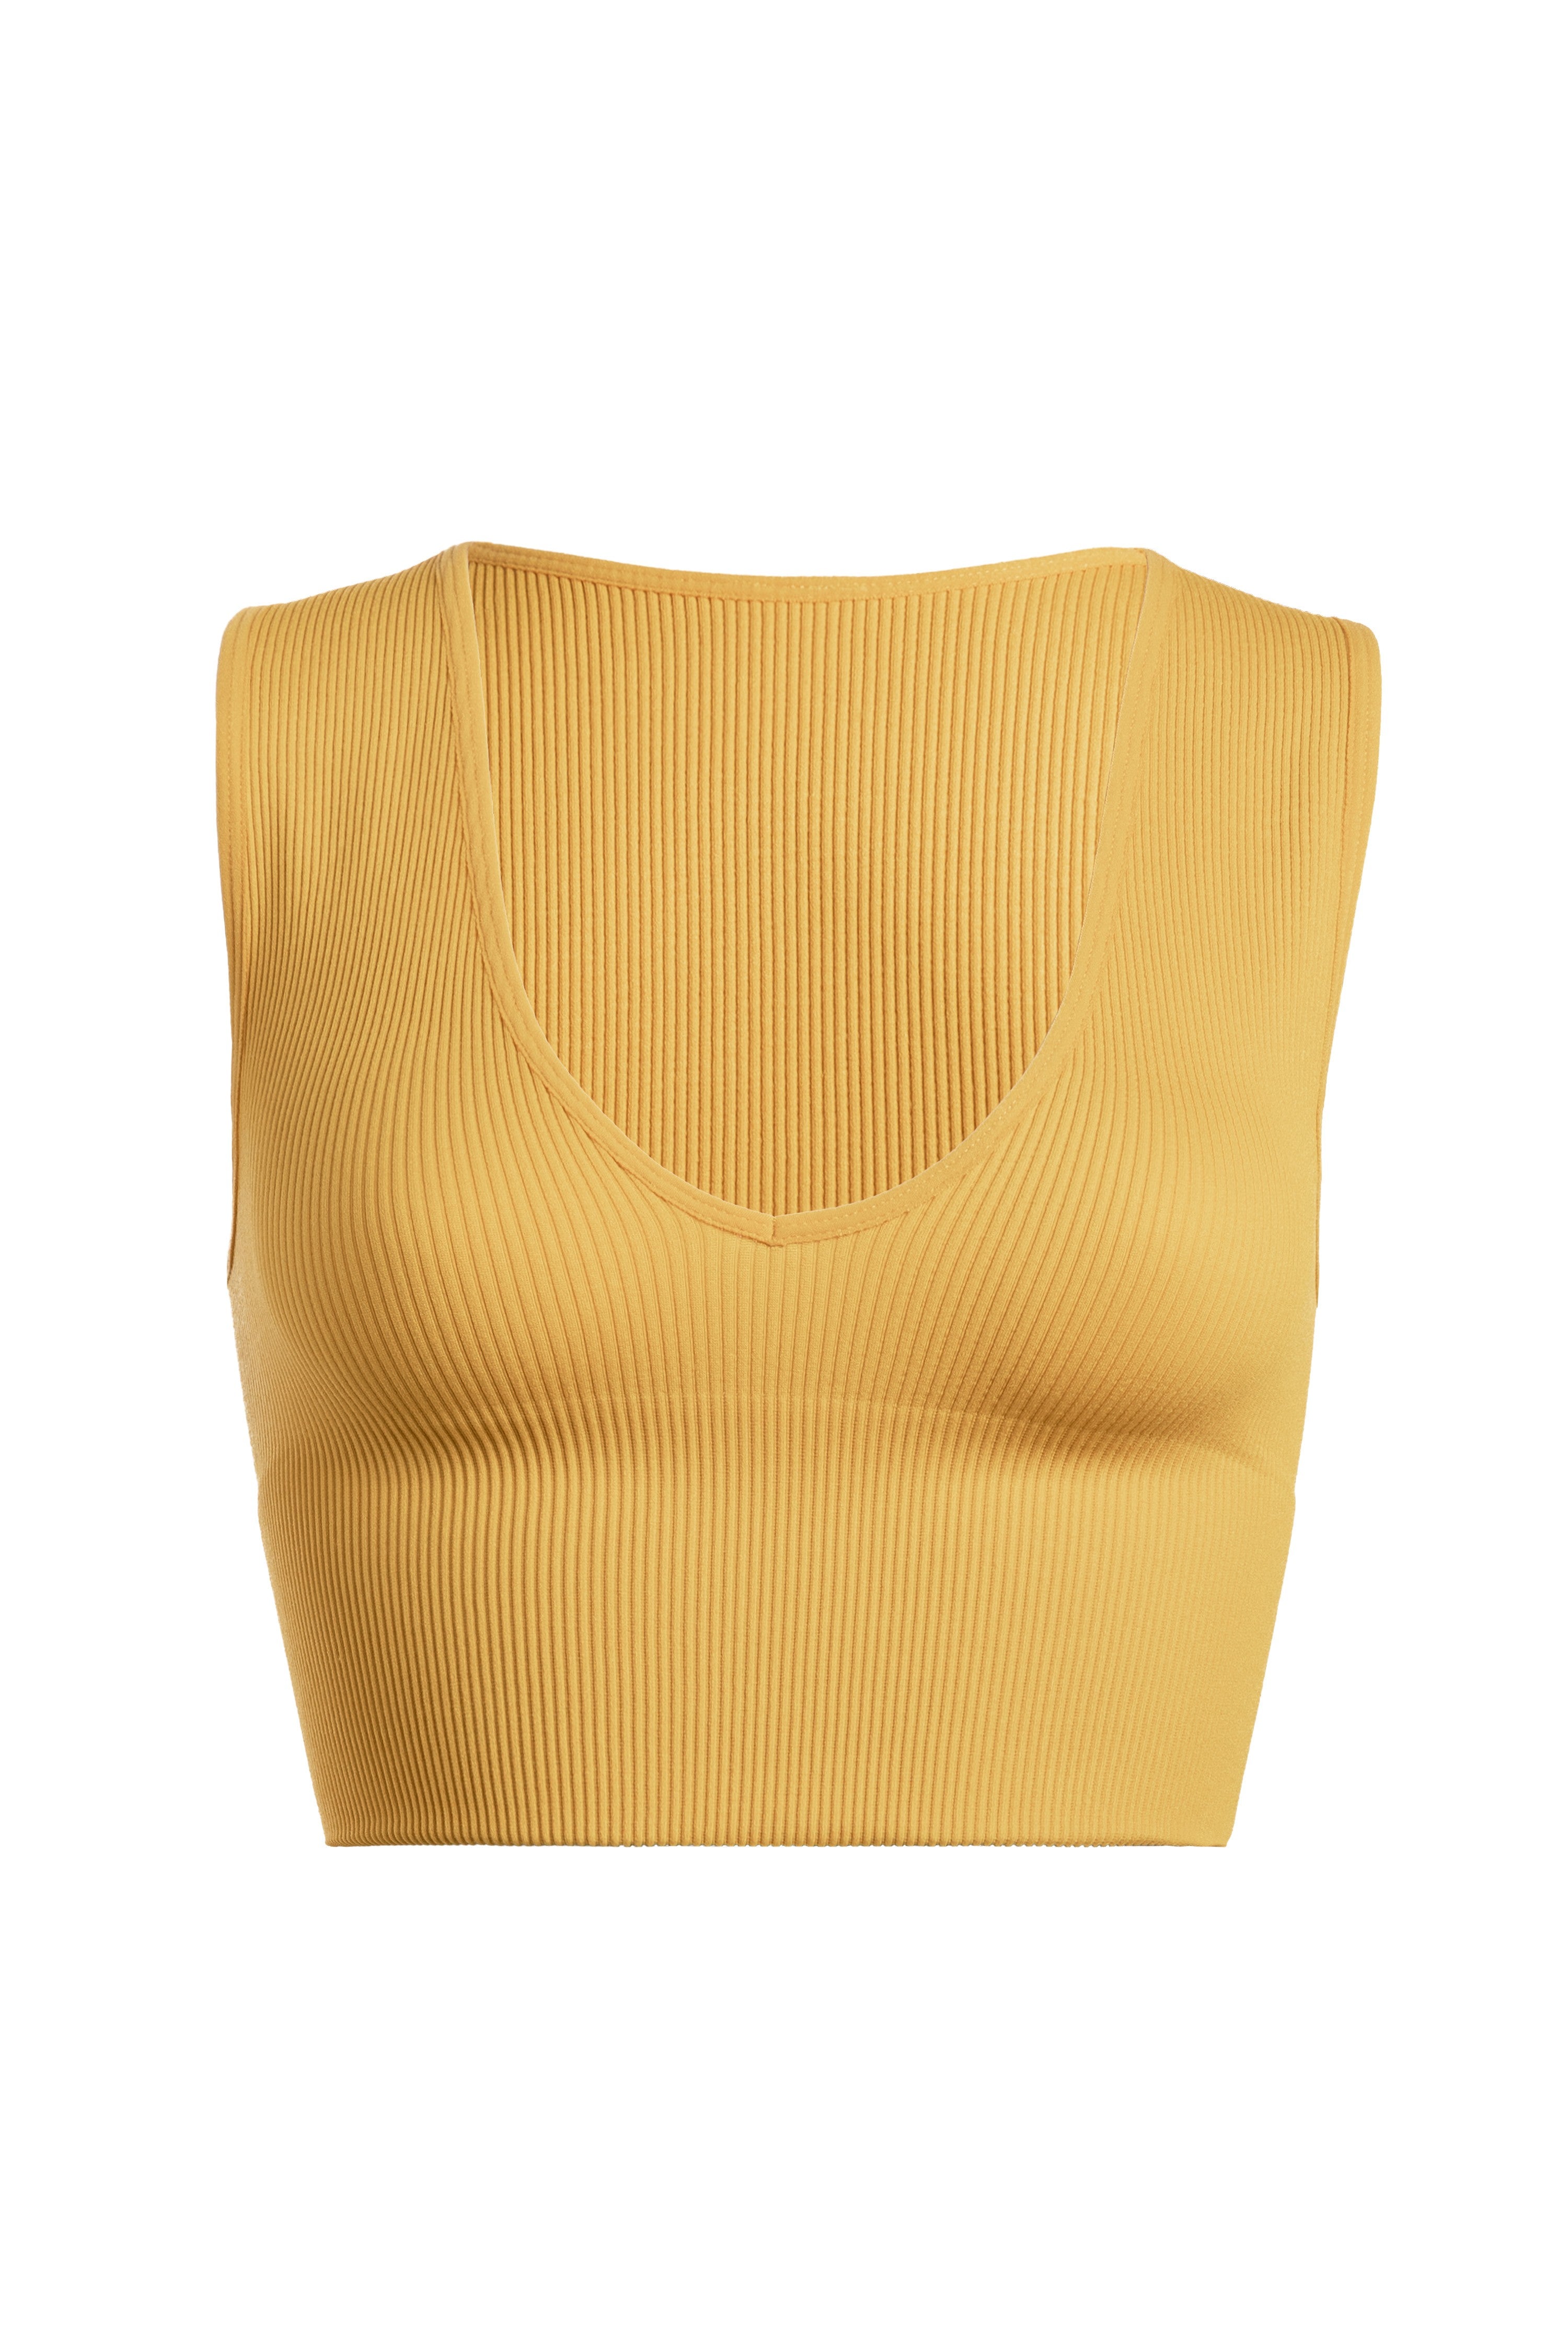 Mustard Deep V Thick Rib Crop Tank | Collective Request 